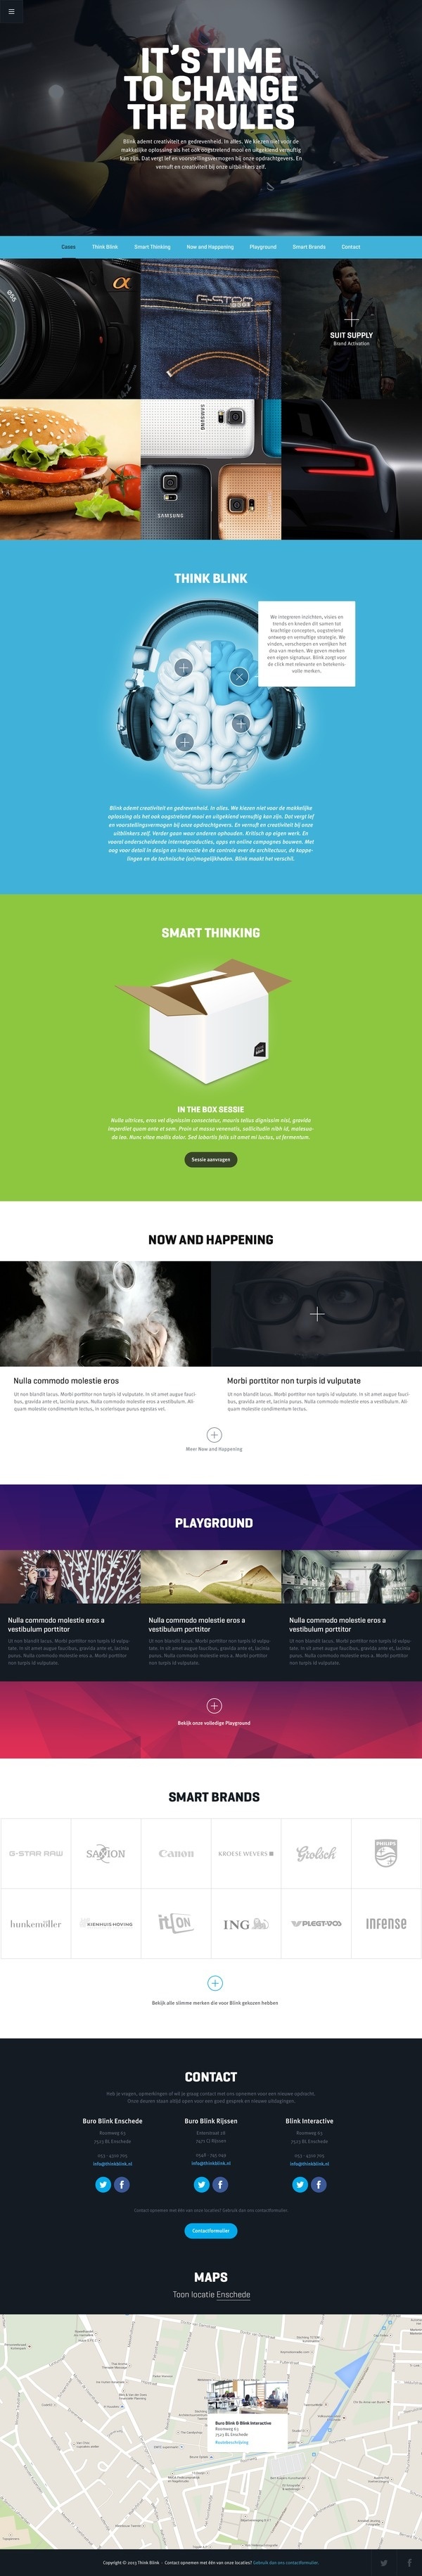 Homepages design idea #324: Think index #homepage #web